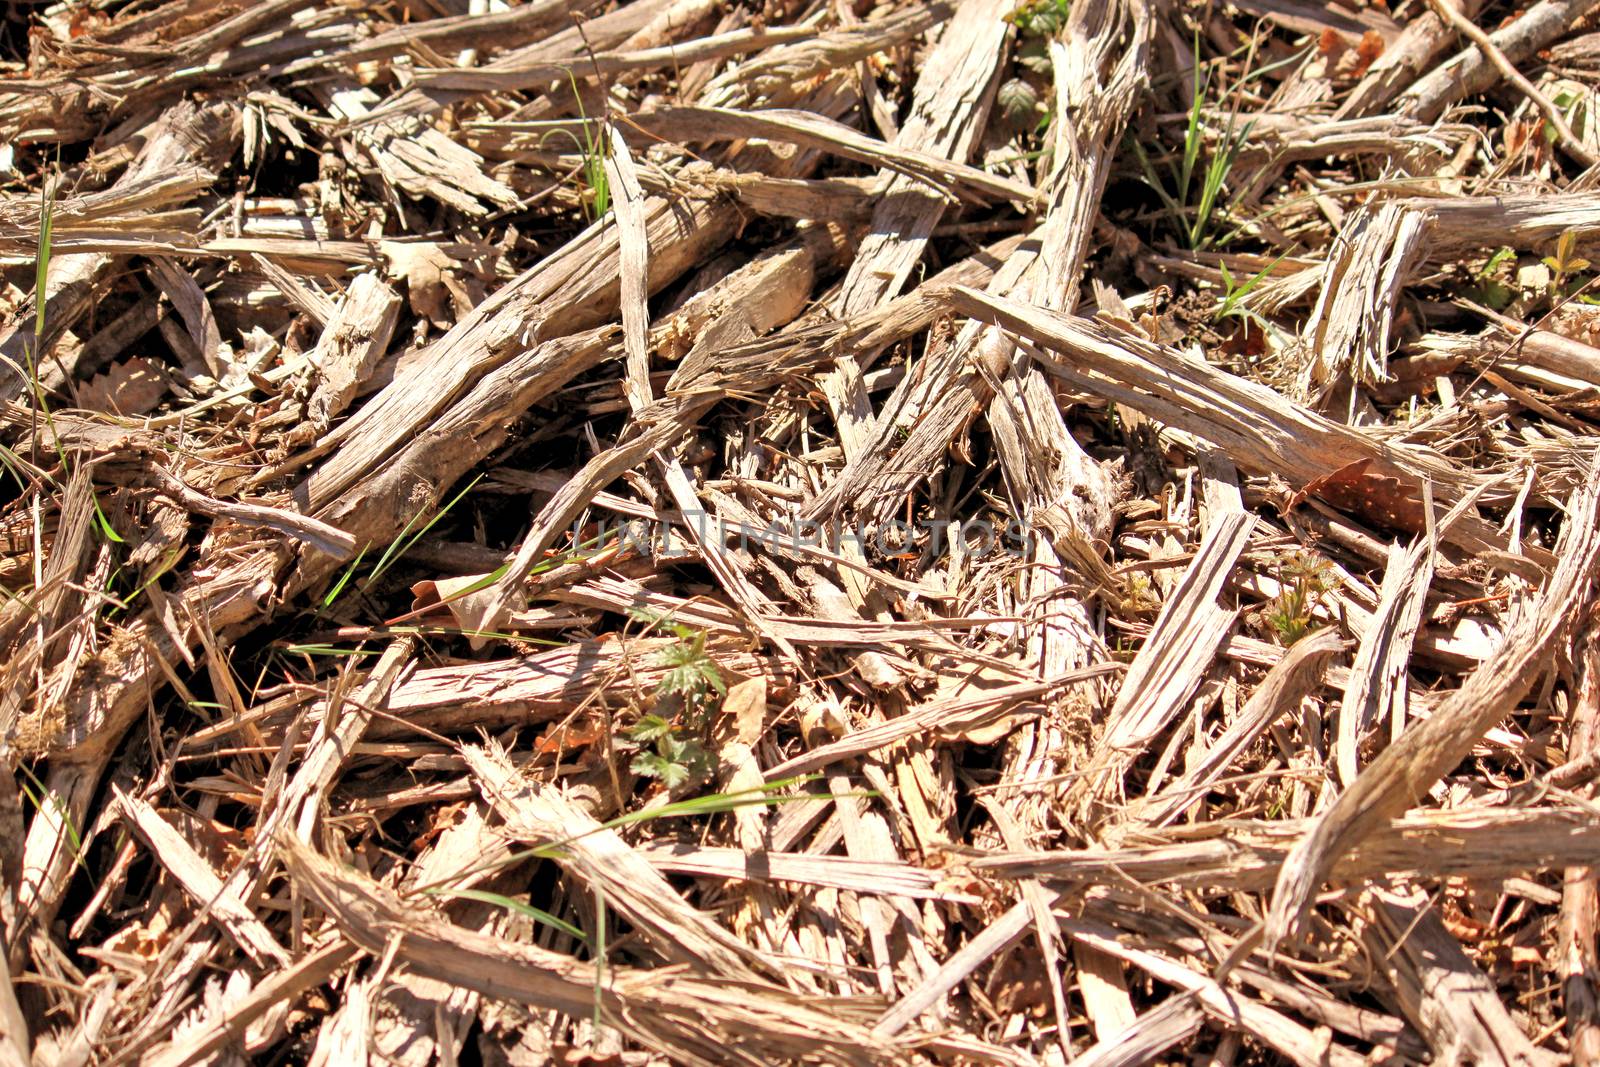 wood on the ground for ecological energy recycling